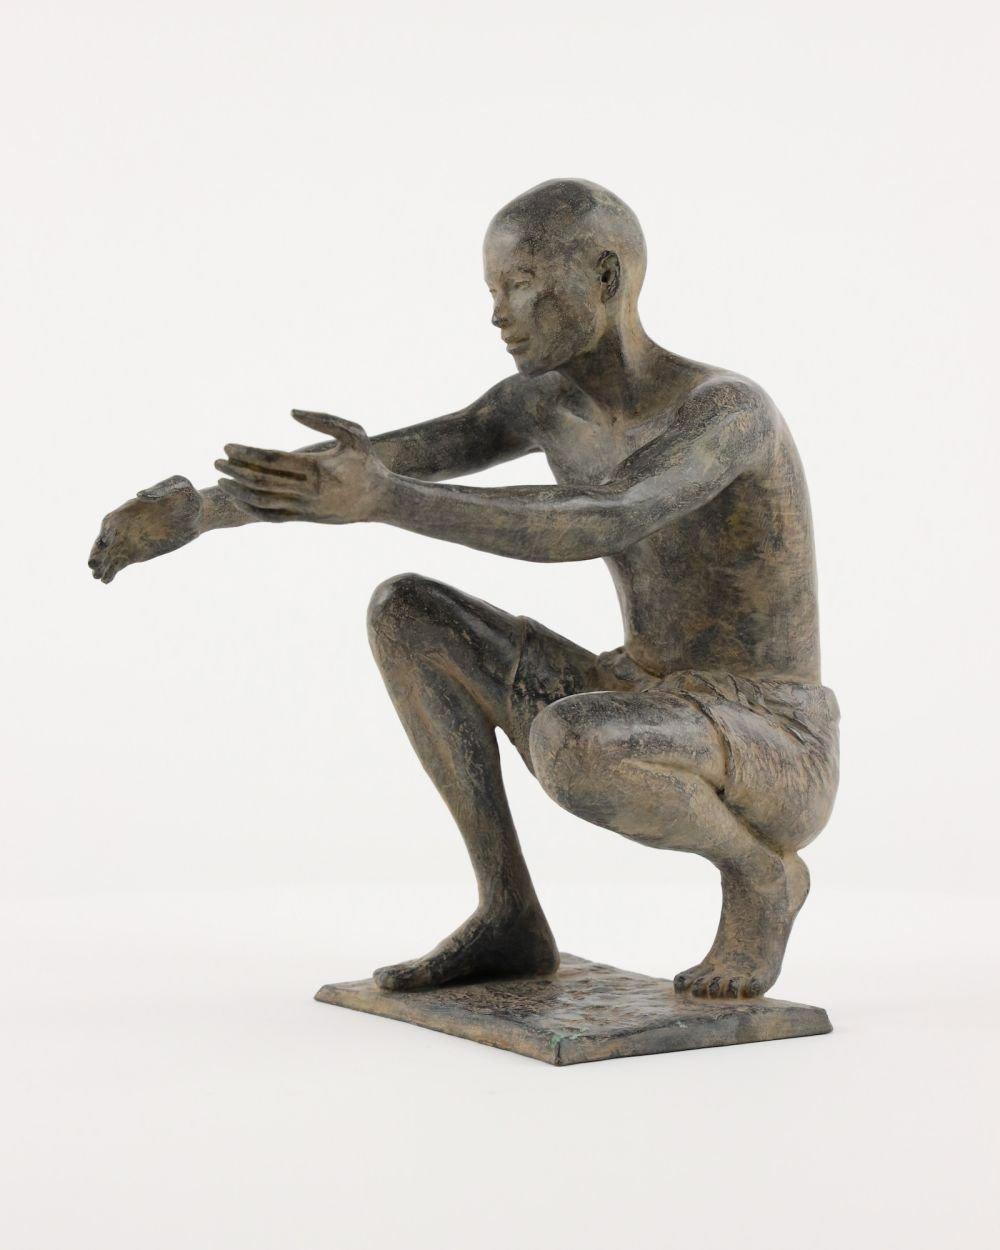 The Welcome by Marine de Soos - bronze sculpture, human figure, limited edition For Sale 2